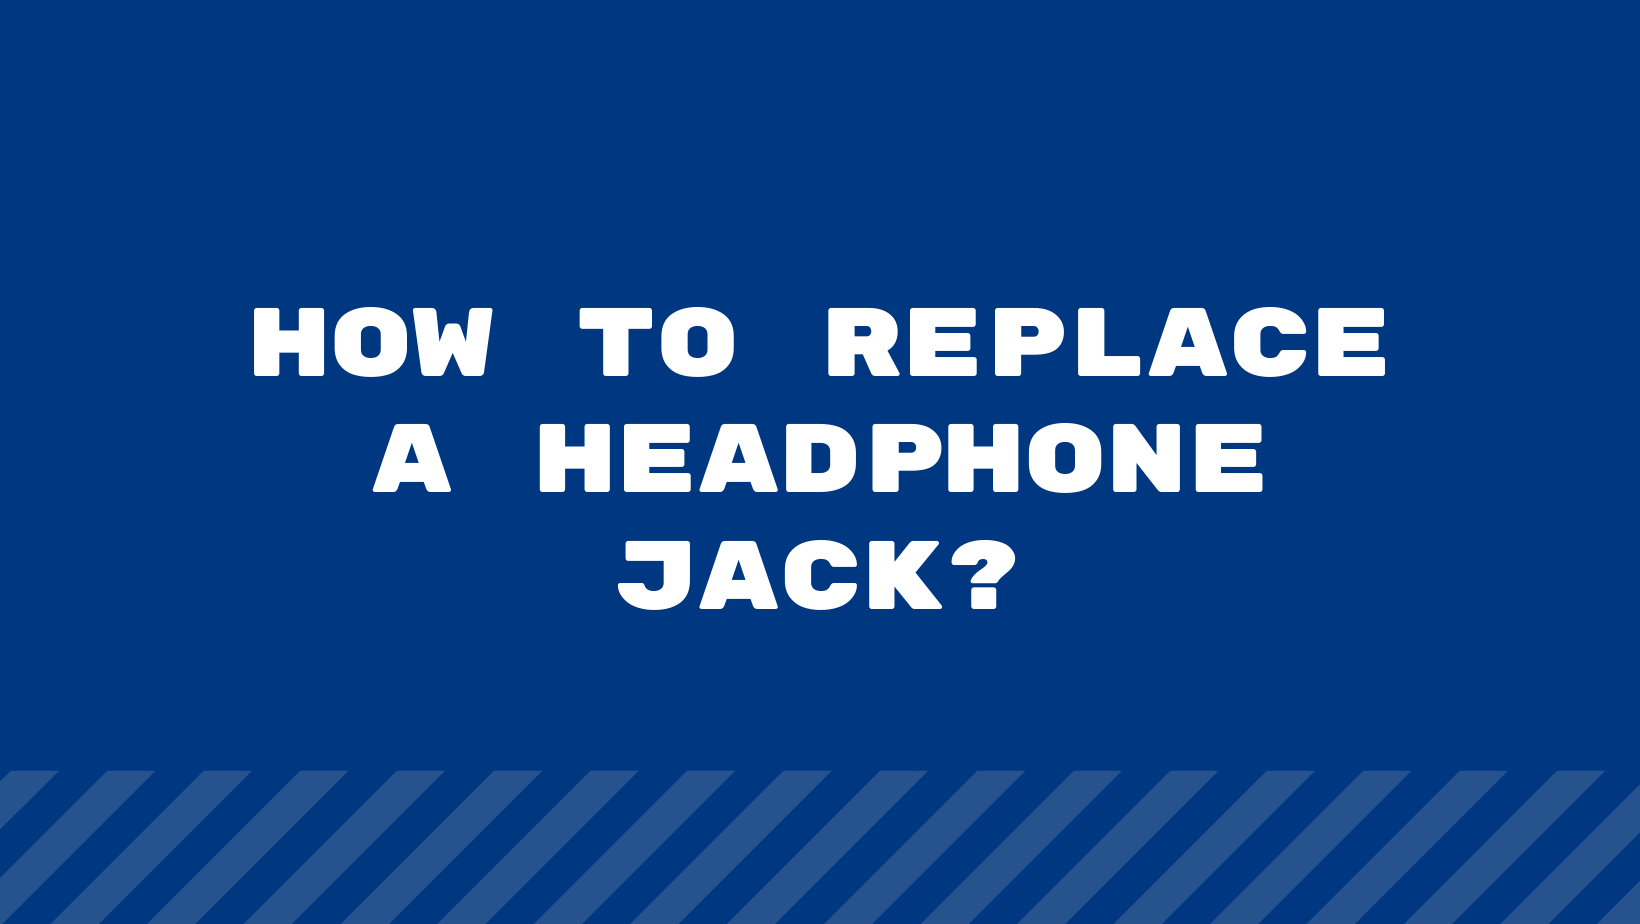 How To Replace A Headphone Jack